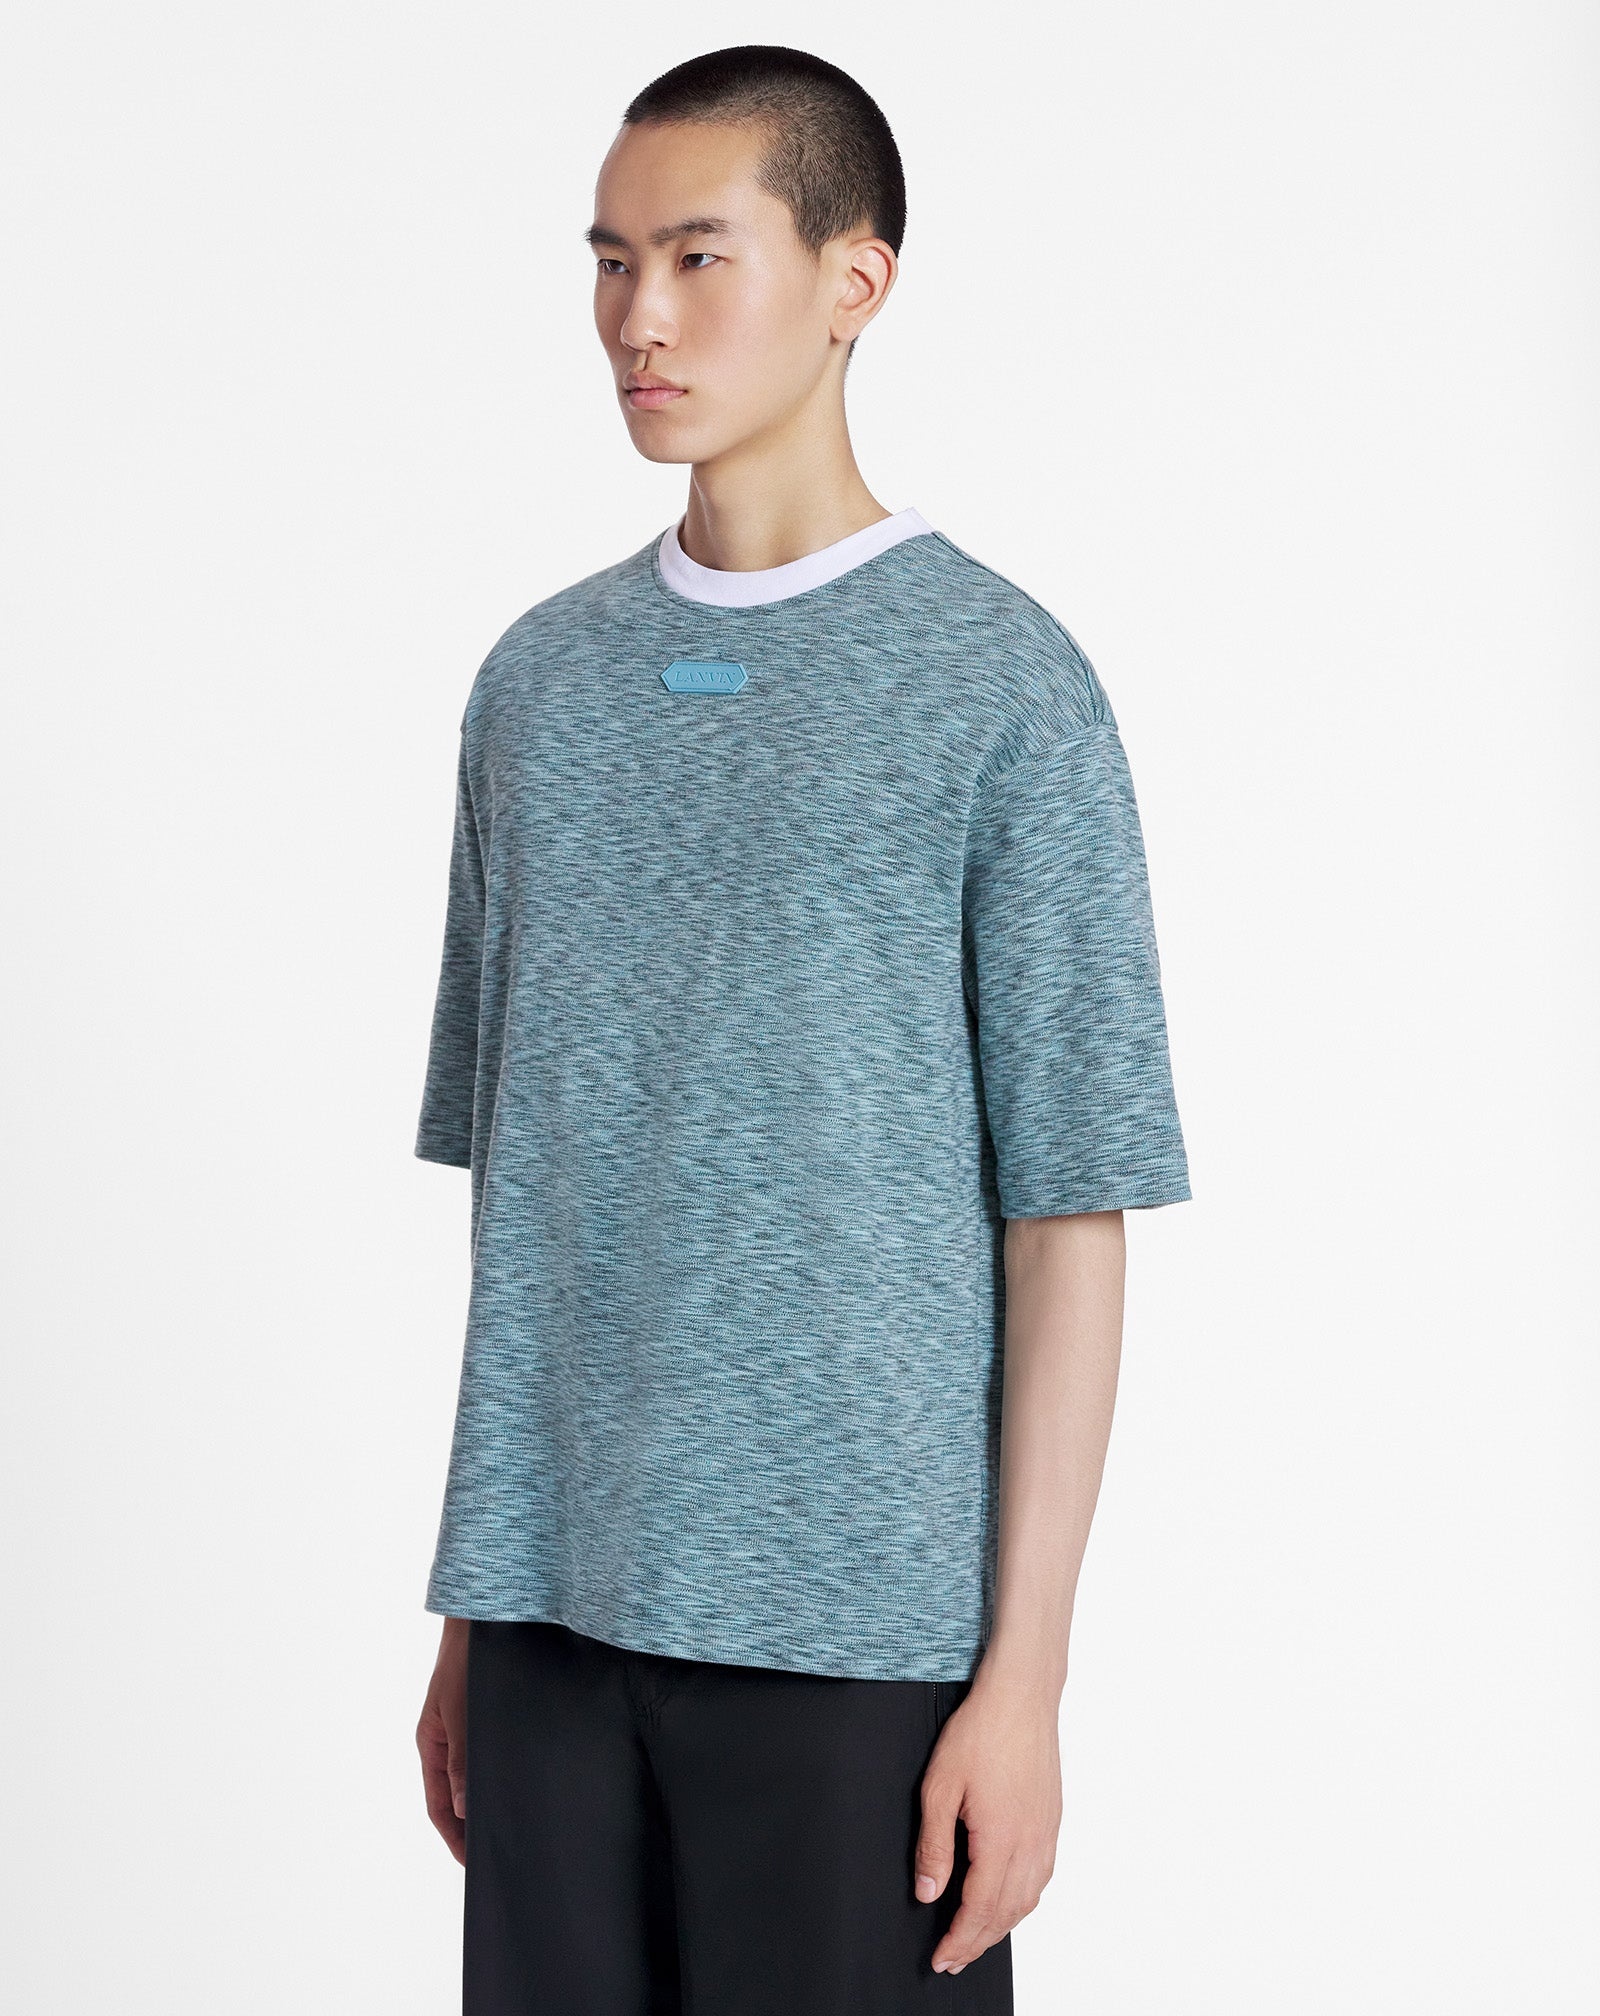 HEATHERED-EFFECT LOOSE-FITTING T-SHIRT - 3